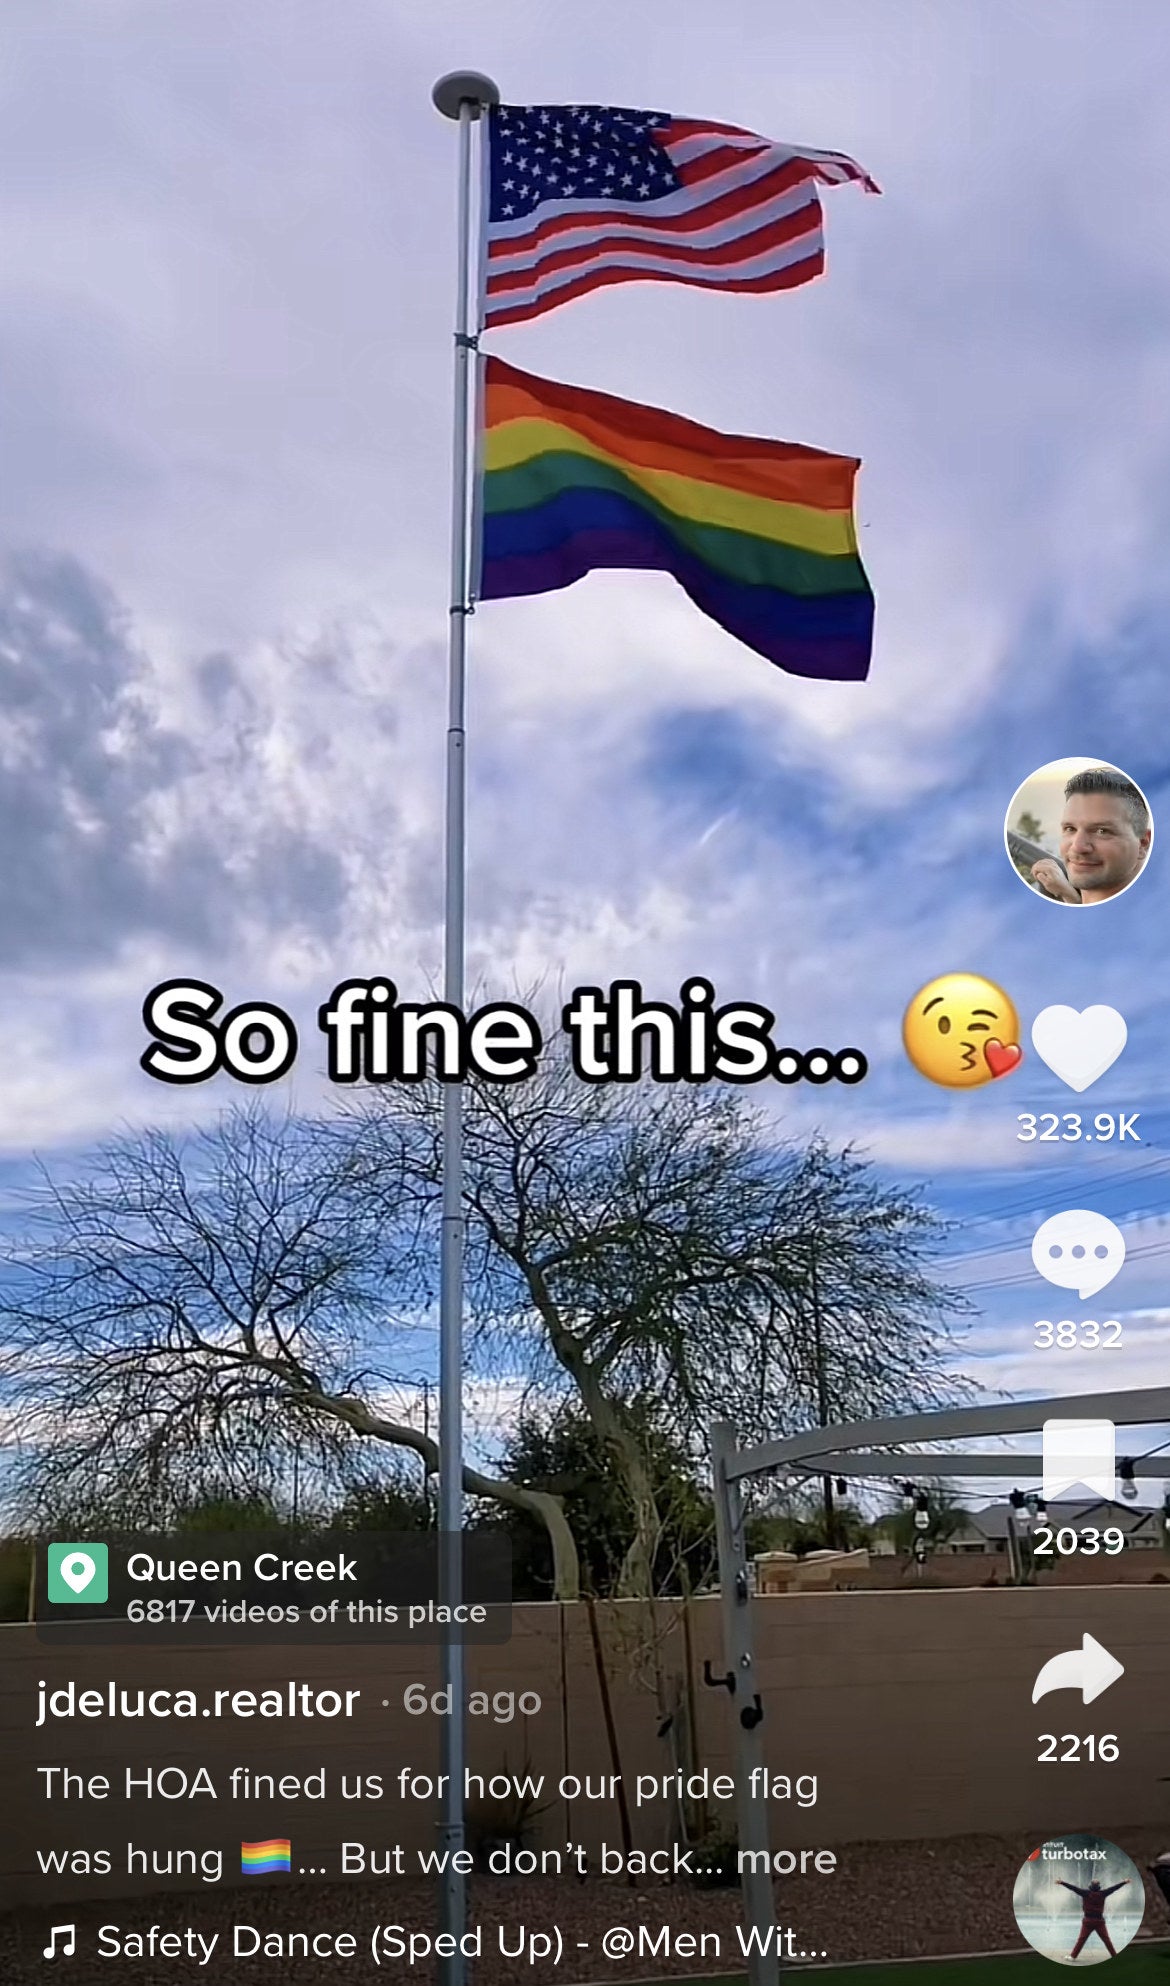 The US and pride flags flying with the caption, &quot;So fine this&quot; with a kiss face emoji